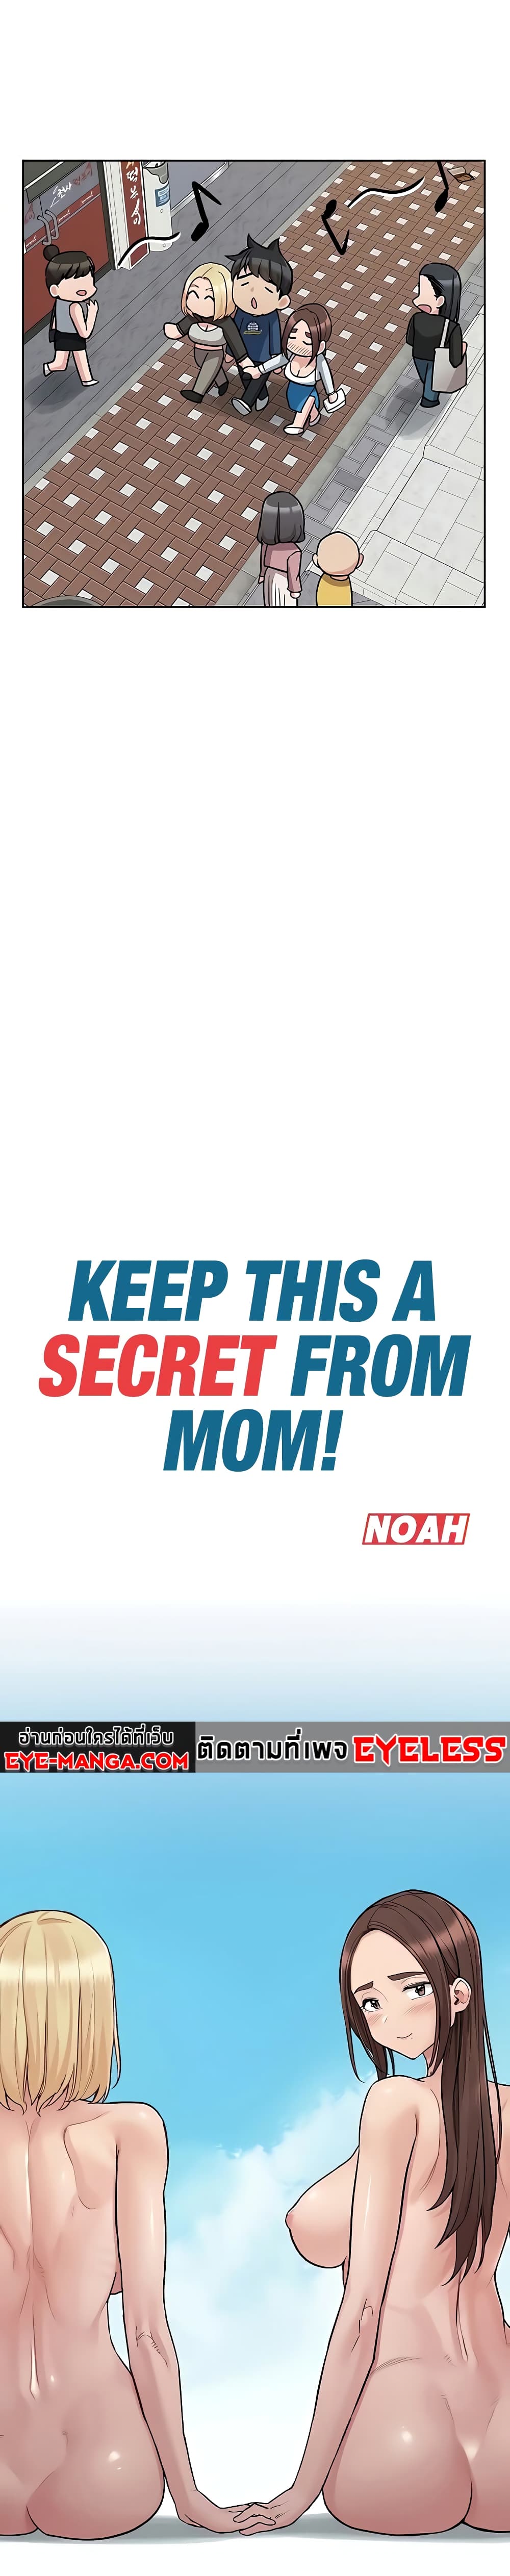 Keep it A Secret from Your Mother! 97-97